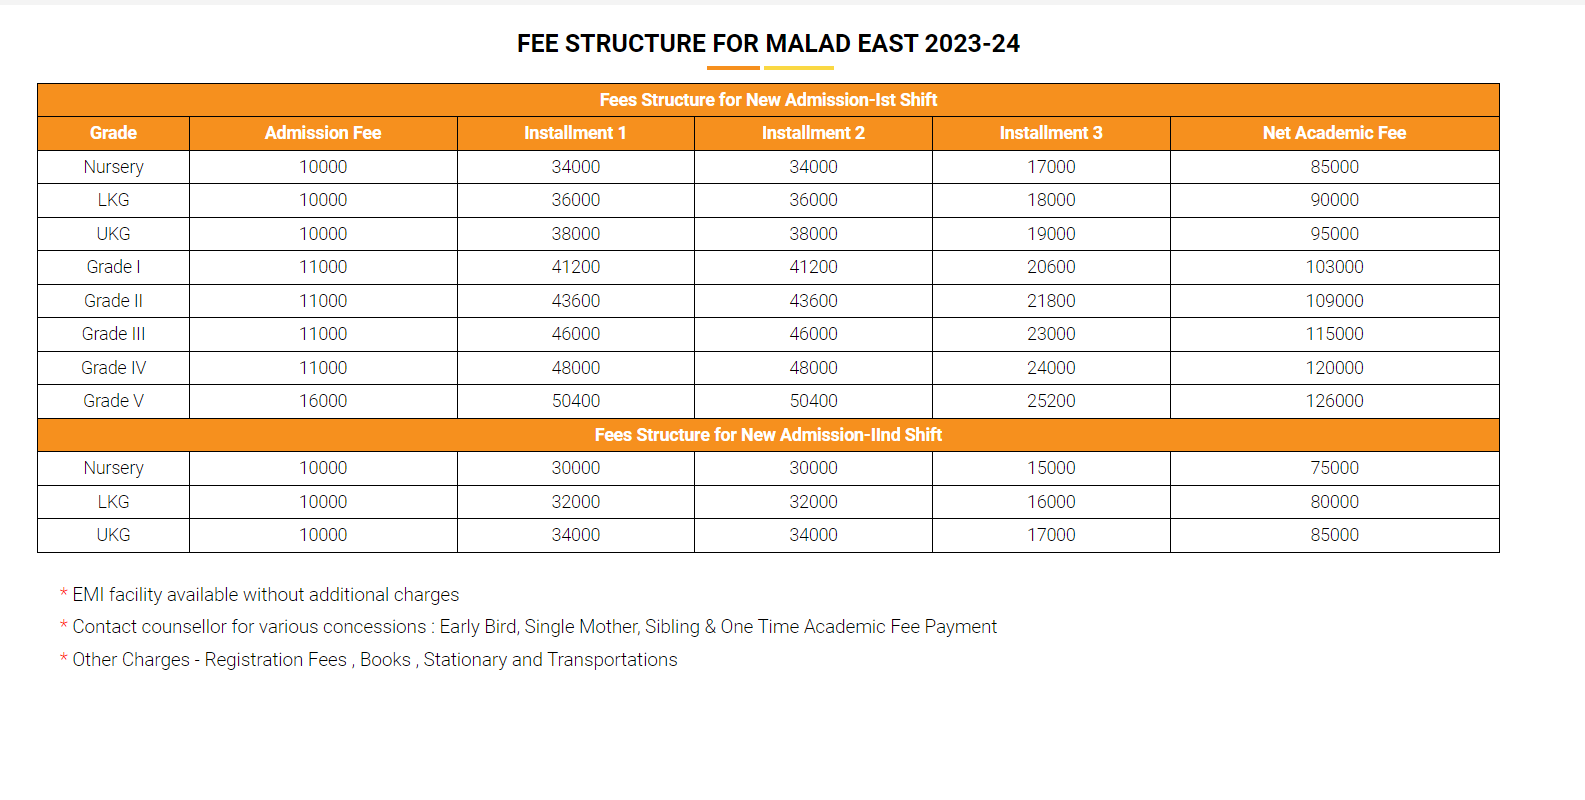 FEE-STRUCTURE-FOR-MALAD-EAST